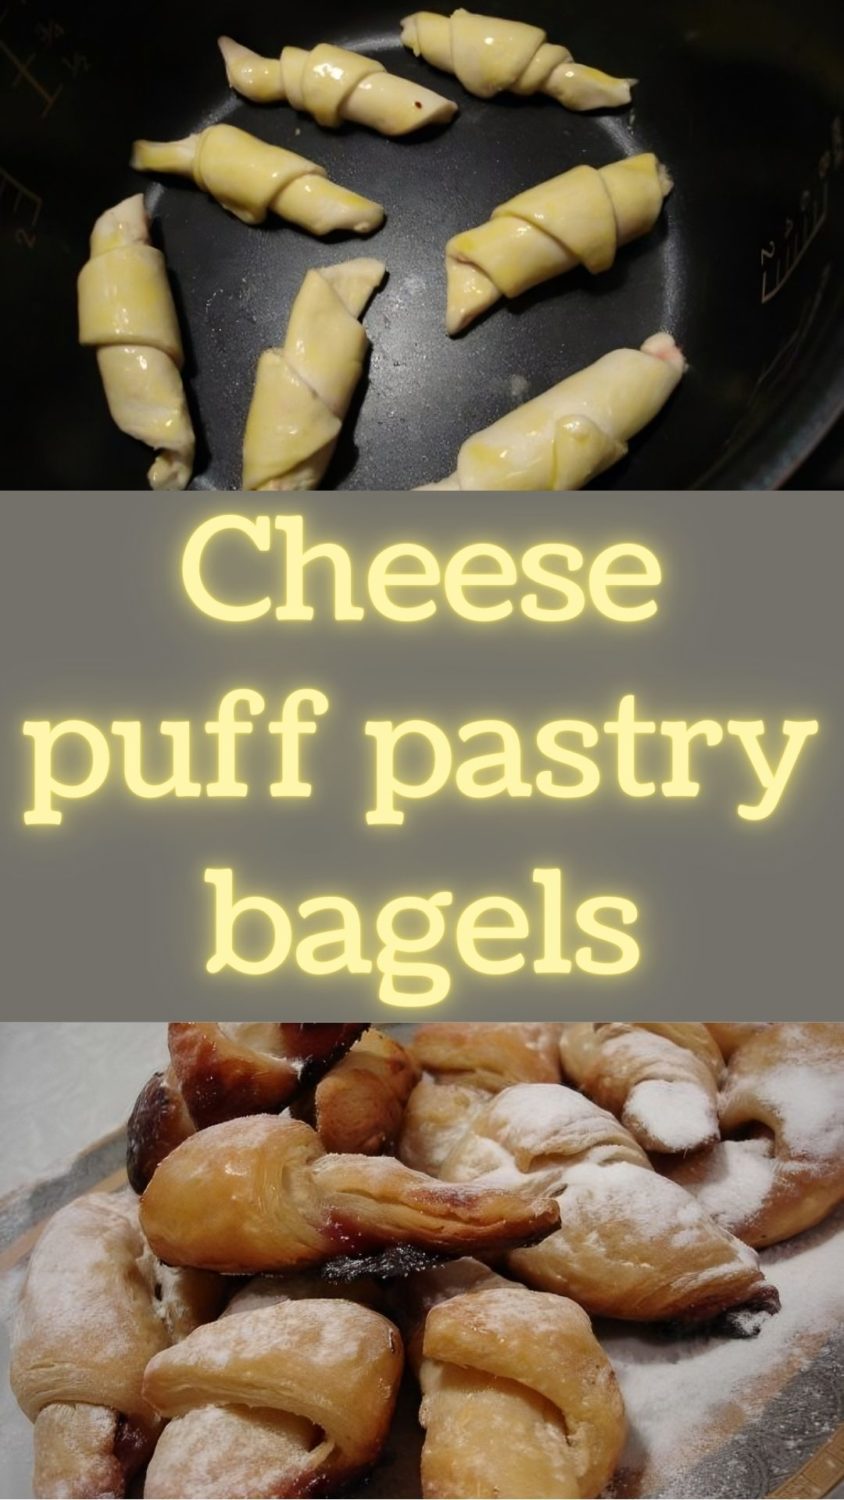 Cheese puff pastry bagels